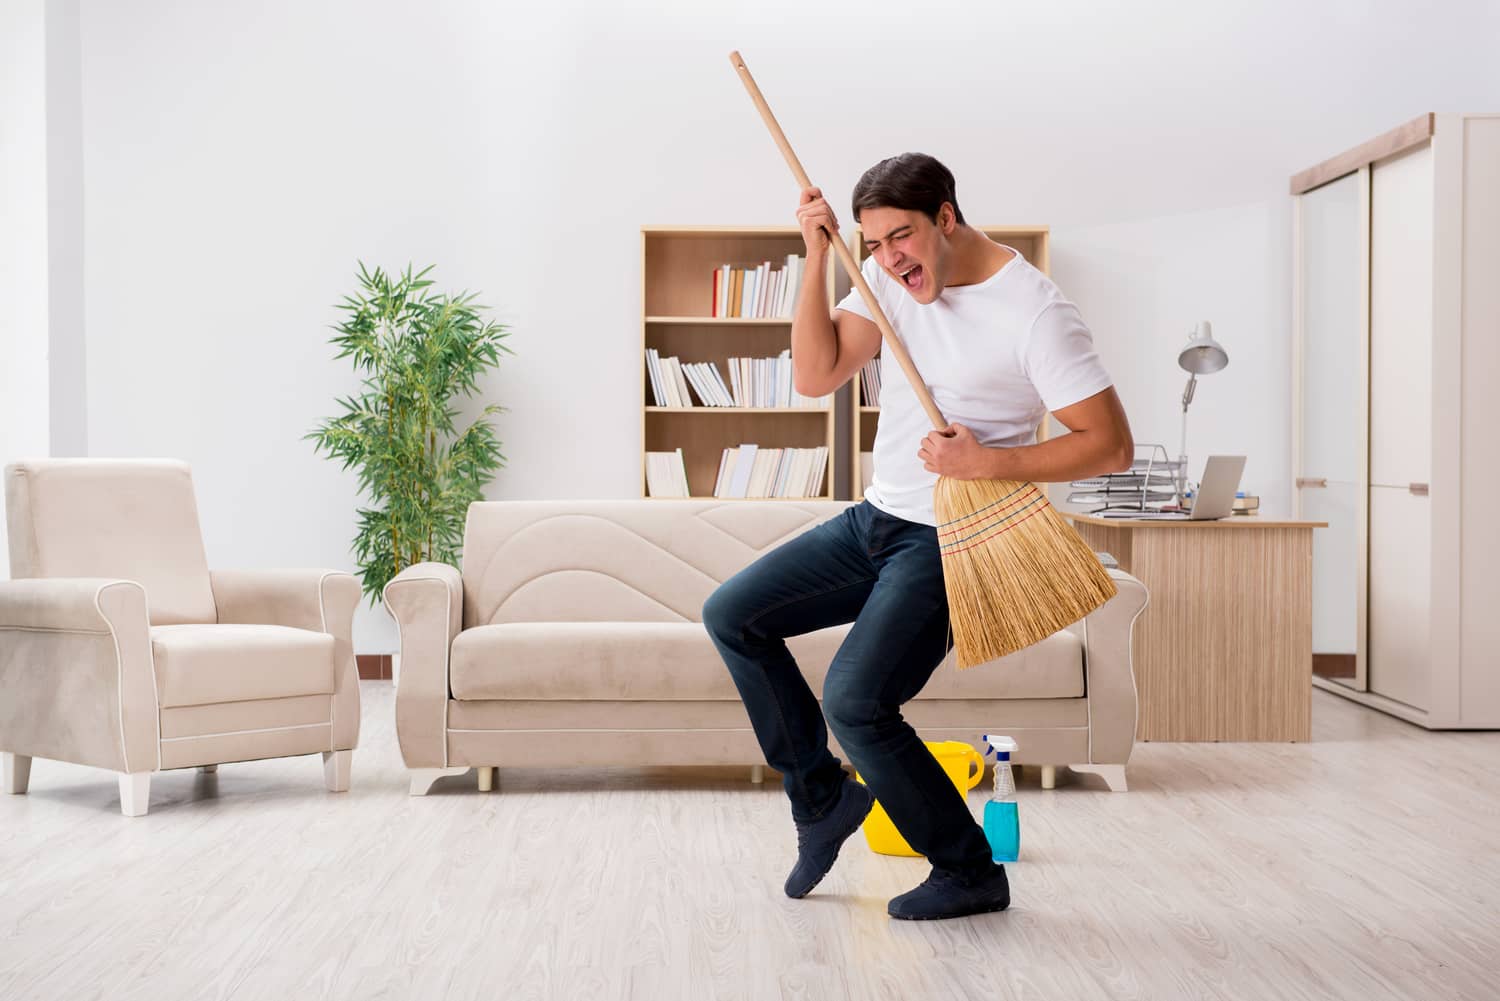 What Grade Are You Getting in Life So Far? Cleaning broom sweeping housework chores